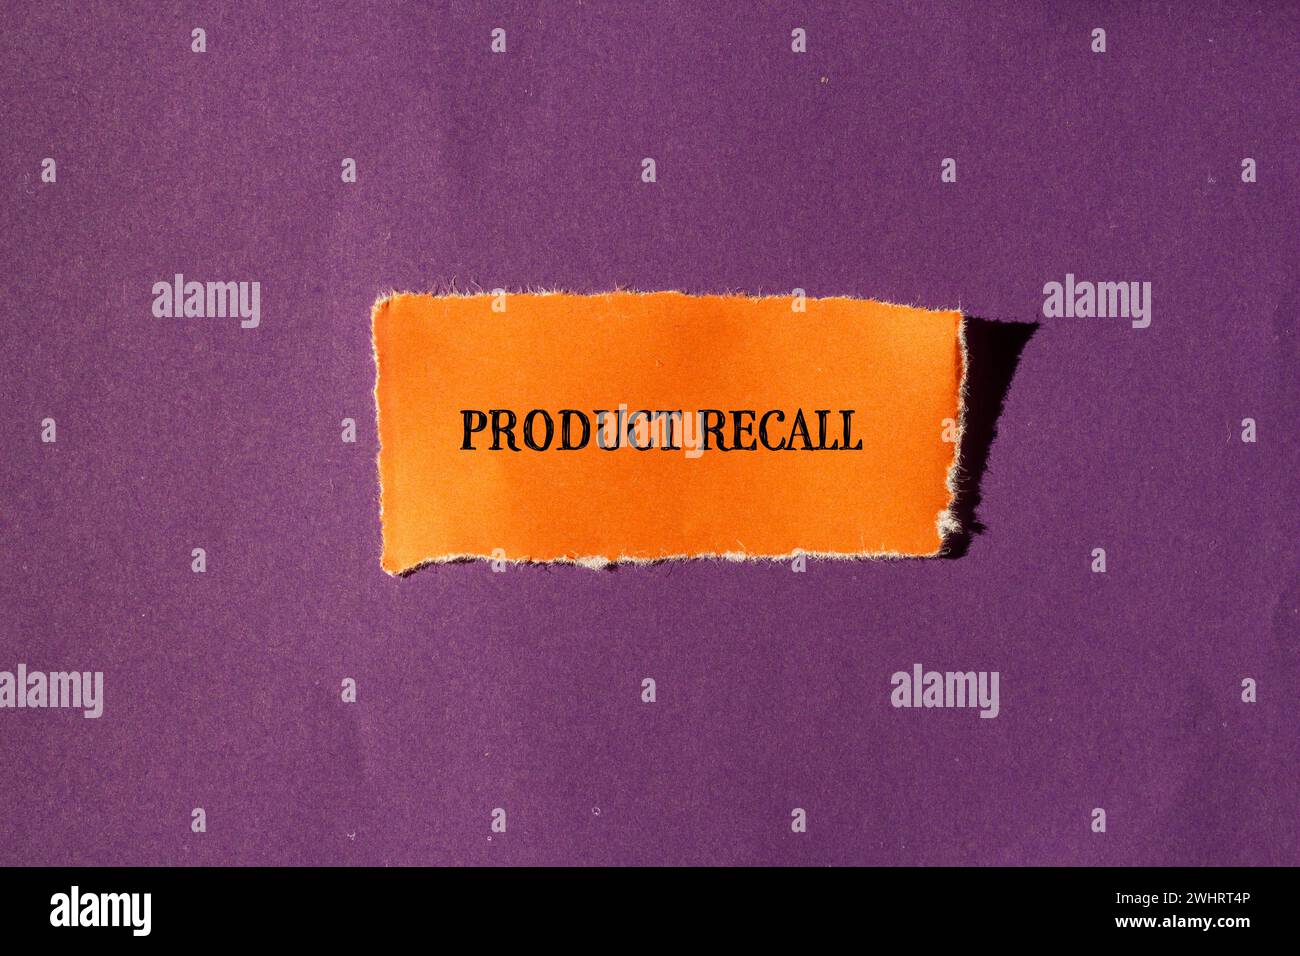 Product recall words written on torn orange paper with purple background. Conceptual business symbol. Copy space. Stock Photo